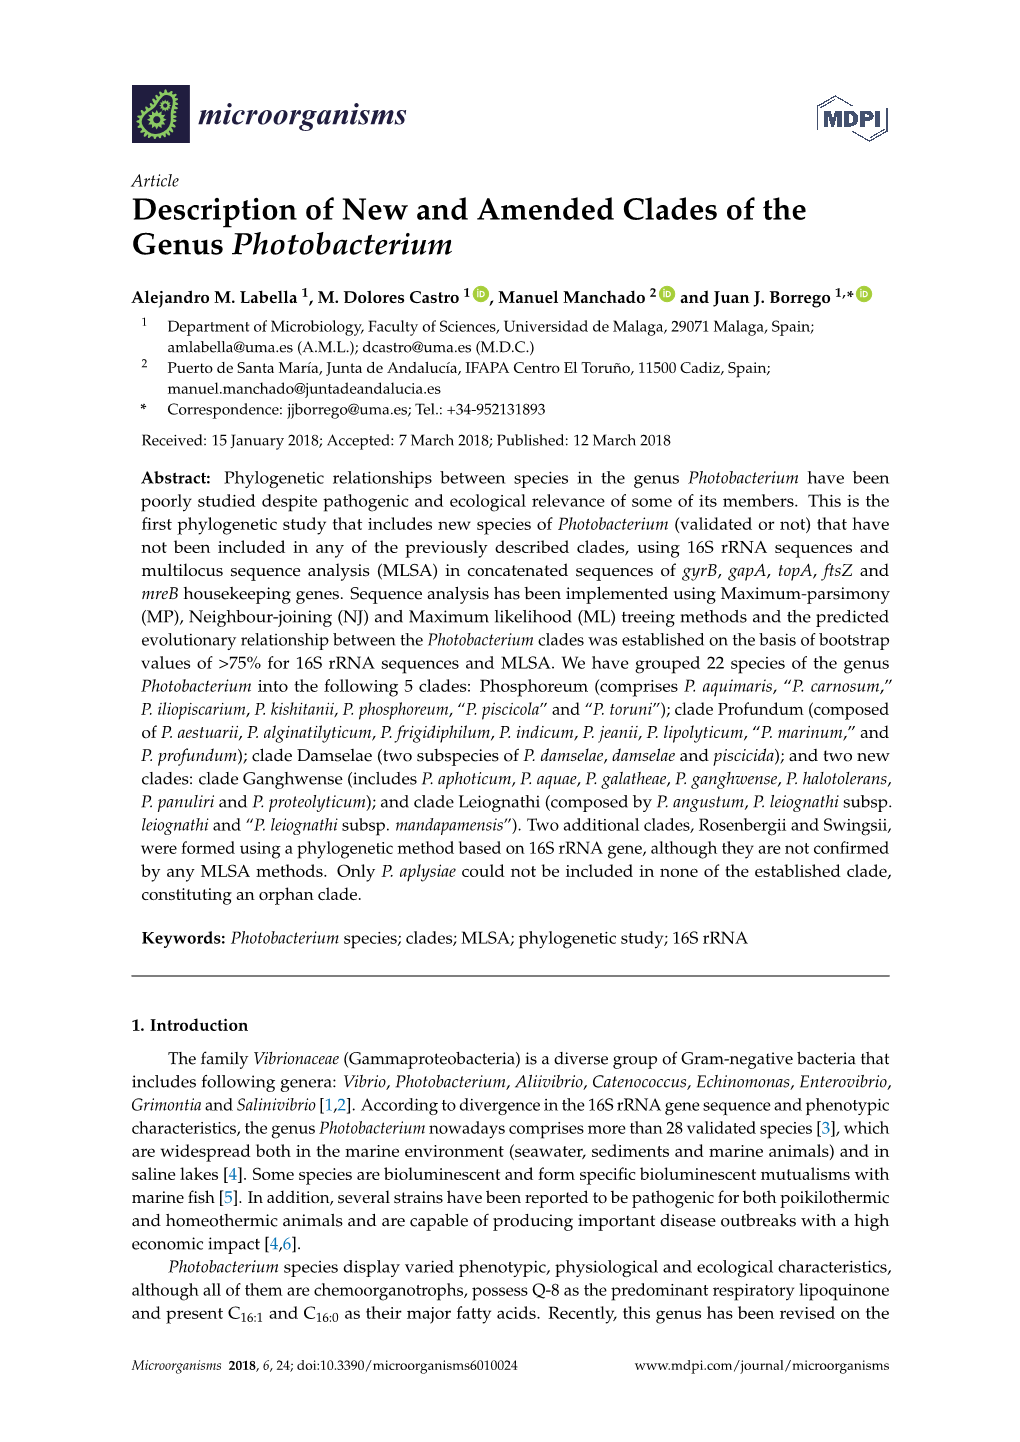 Description of New and Amended Clades of the Genus Photobacterium